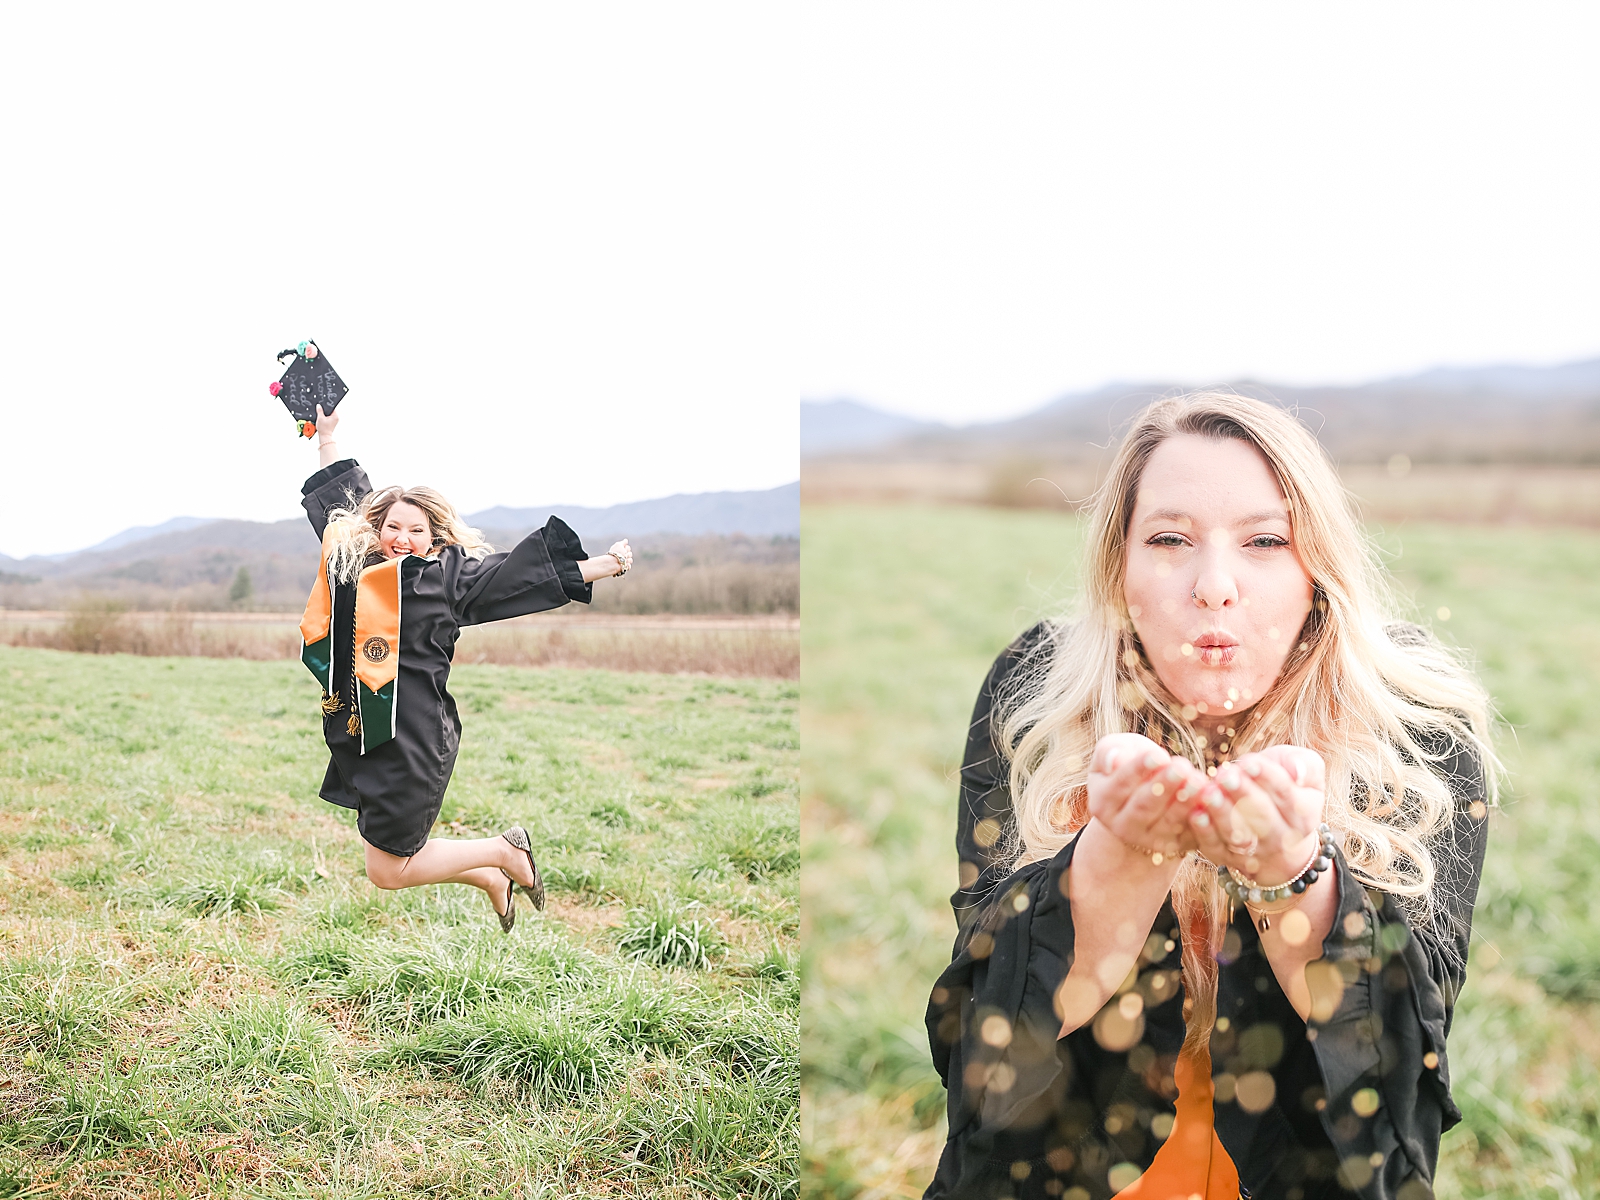 Kennesaw State University Senior Session Rachel jumping in her cap and gown and blowing glitter photos